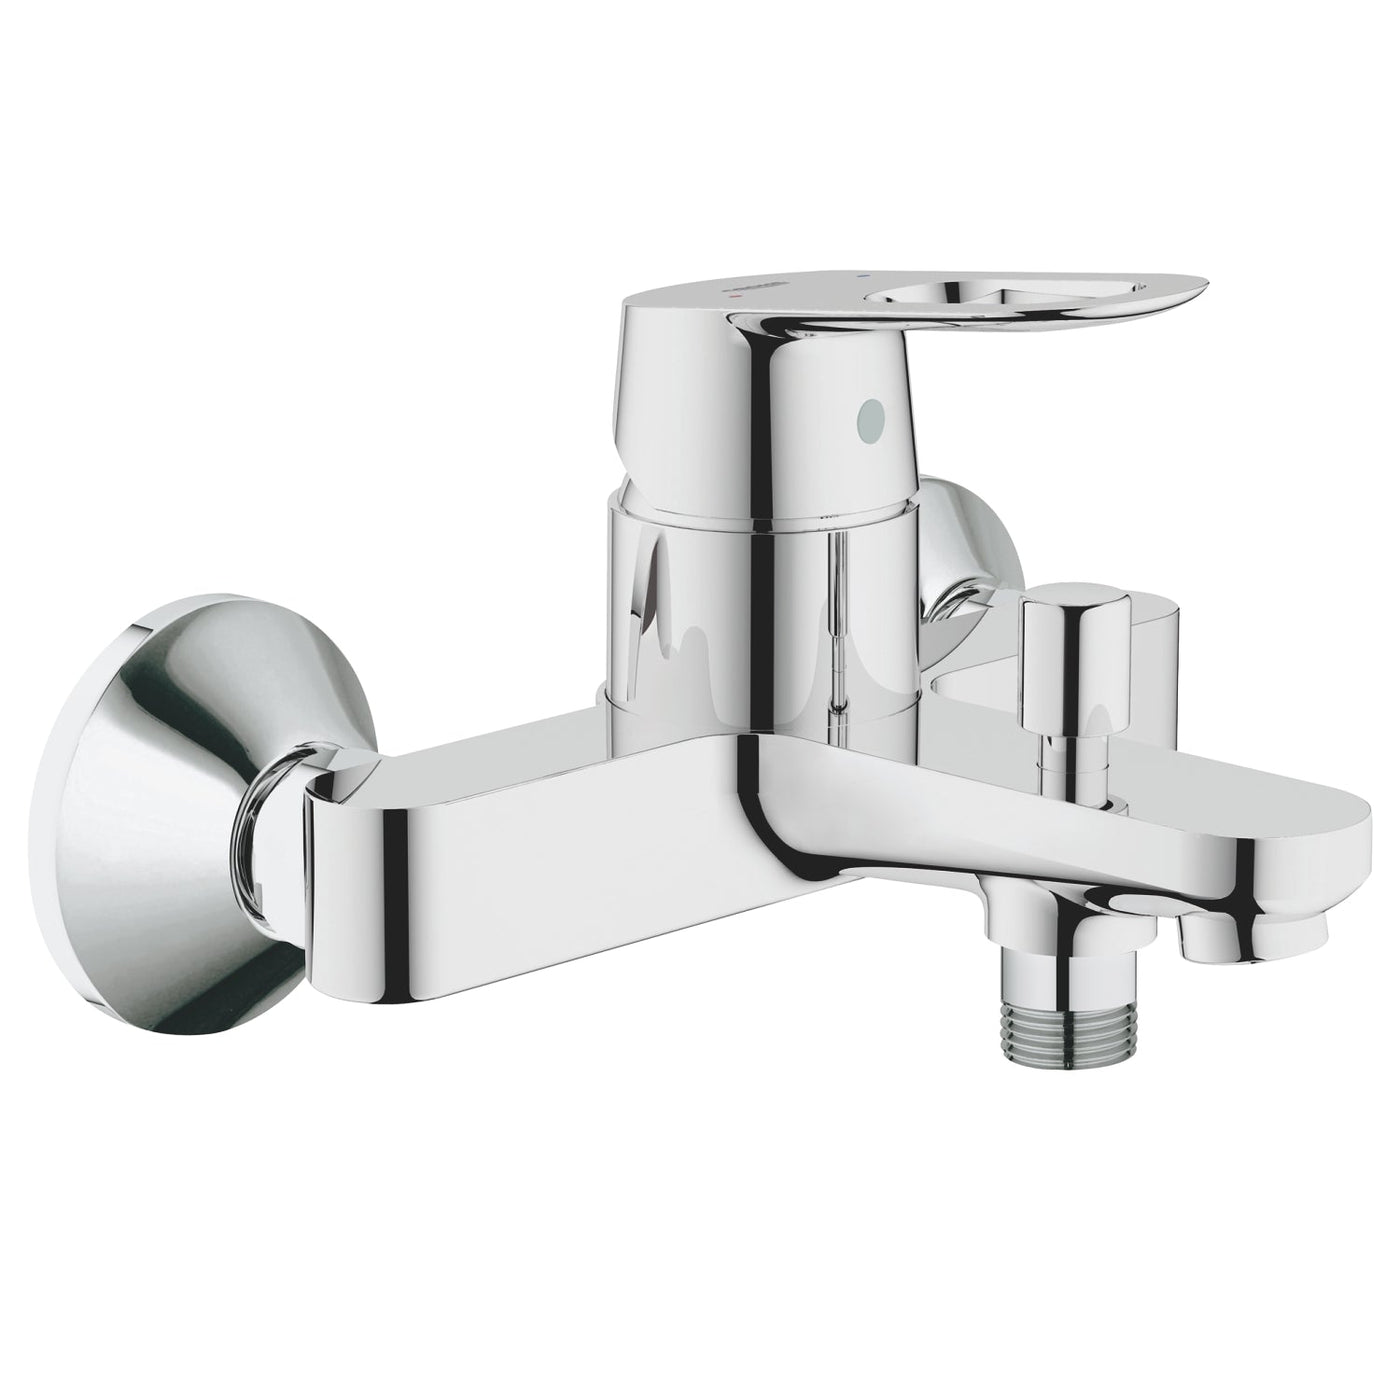 Grohe Wall Mounted Chrome BauLoop Single-lever bath/shower mixer 1/2" - Letta London - 